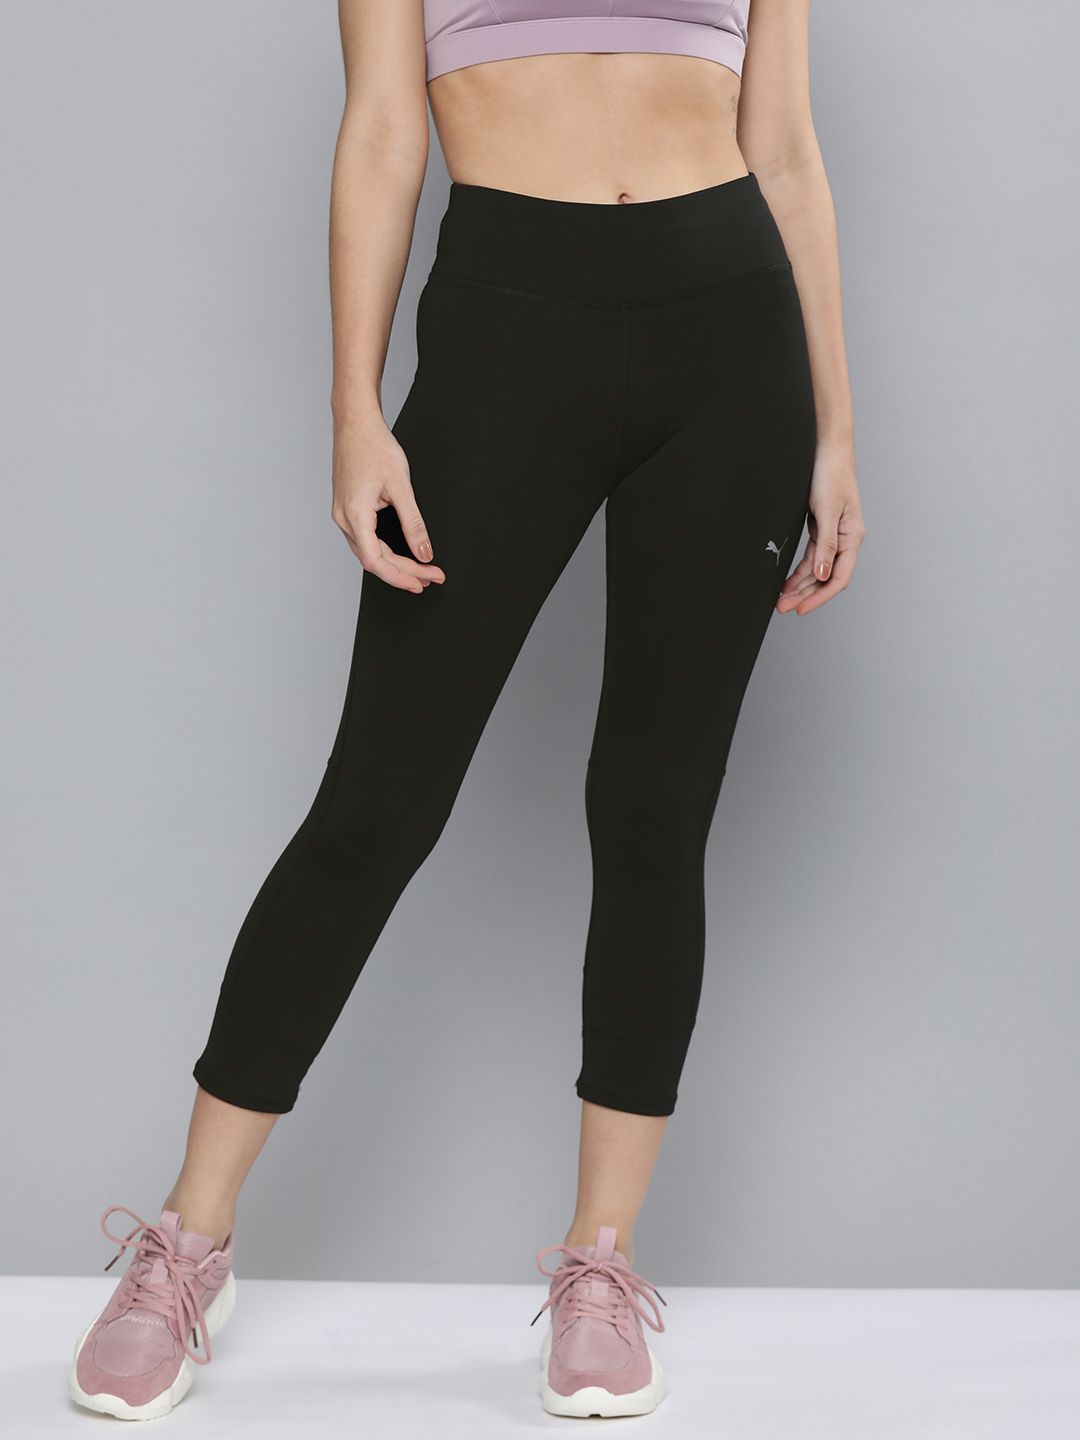 Puma Women Black Solid 3/4 Running Tights Price in India